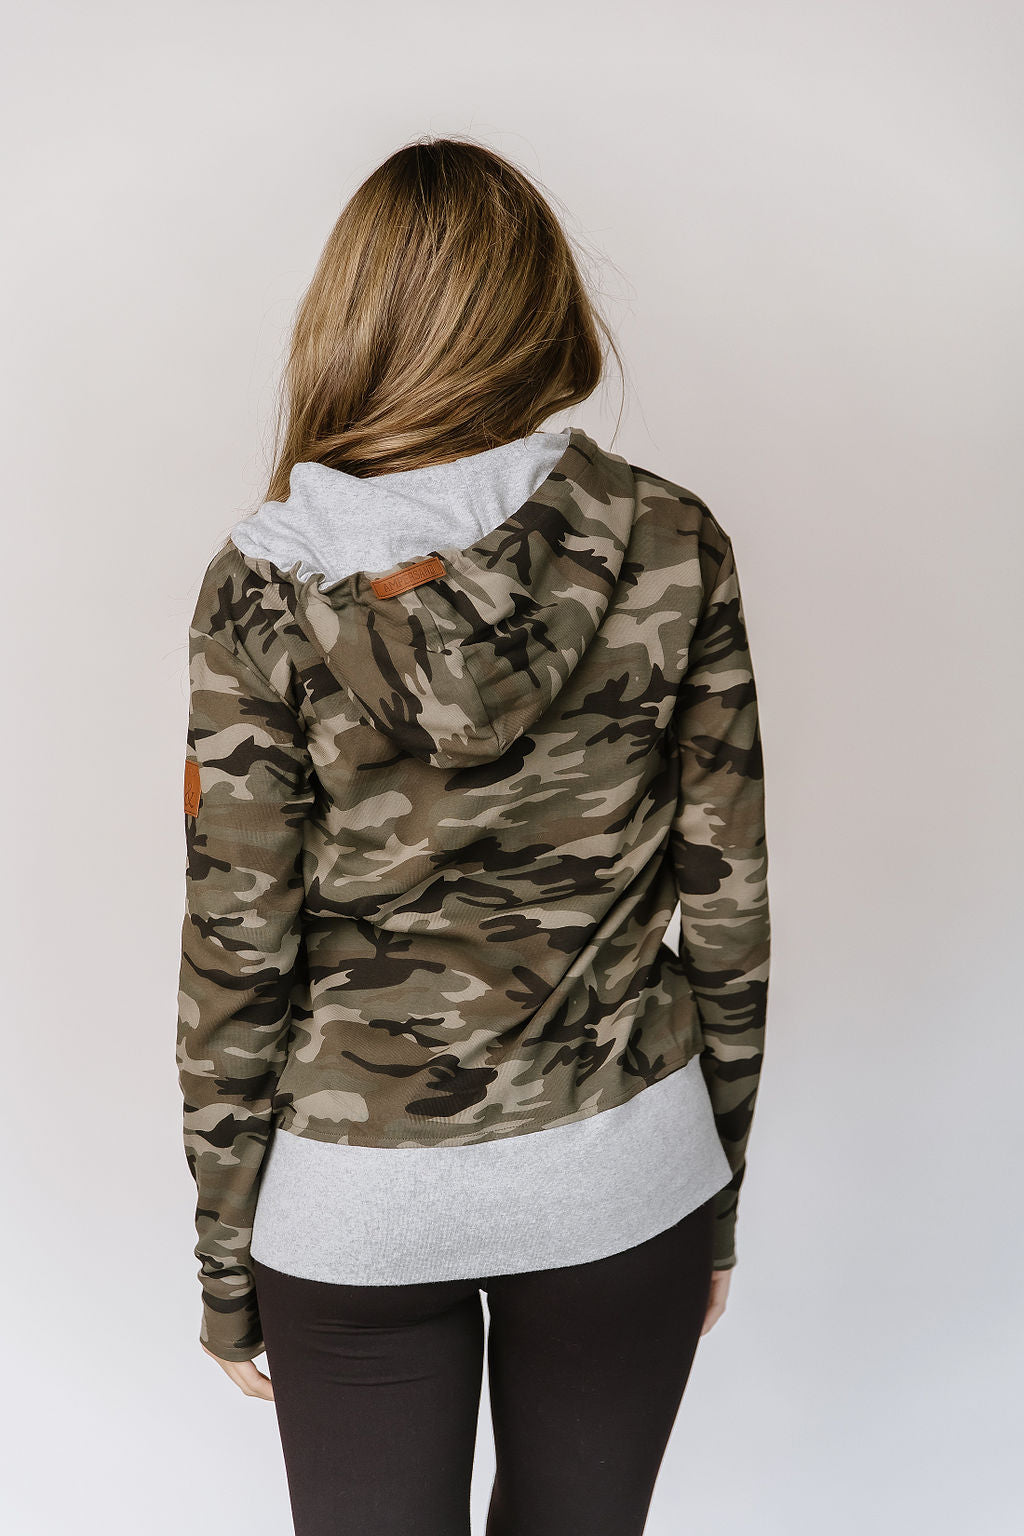 NEW!  Ampersand Fullzip Sweatshirt - In Plain Sight ~ Green Camo ~  Available in Curvy!